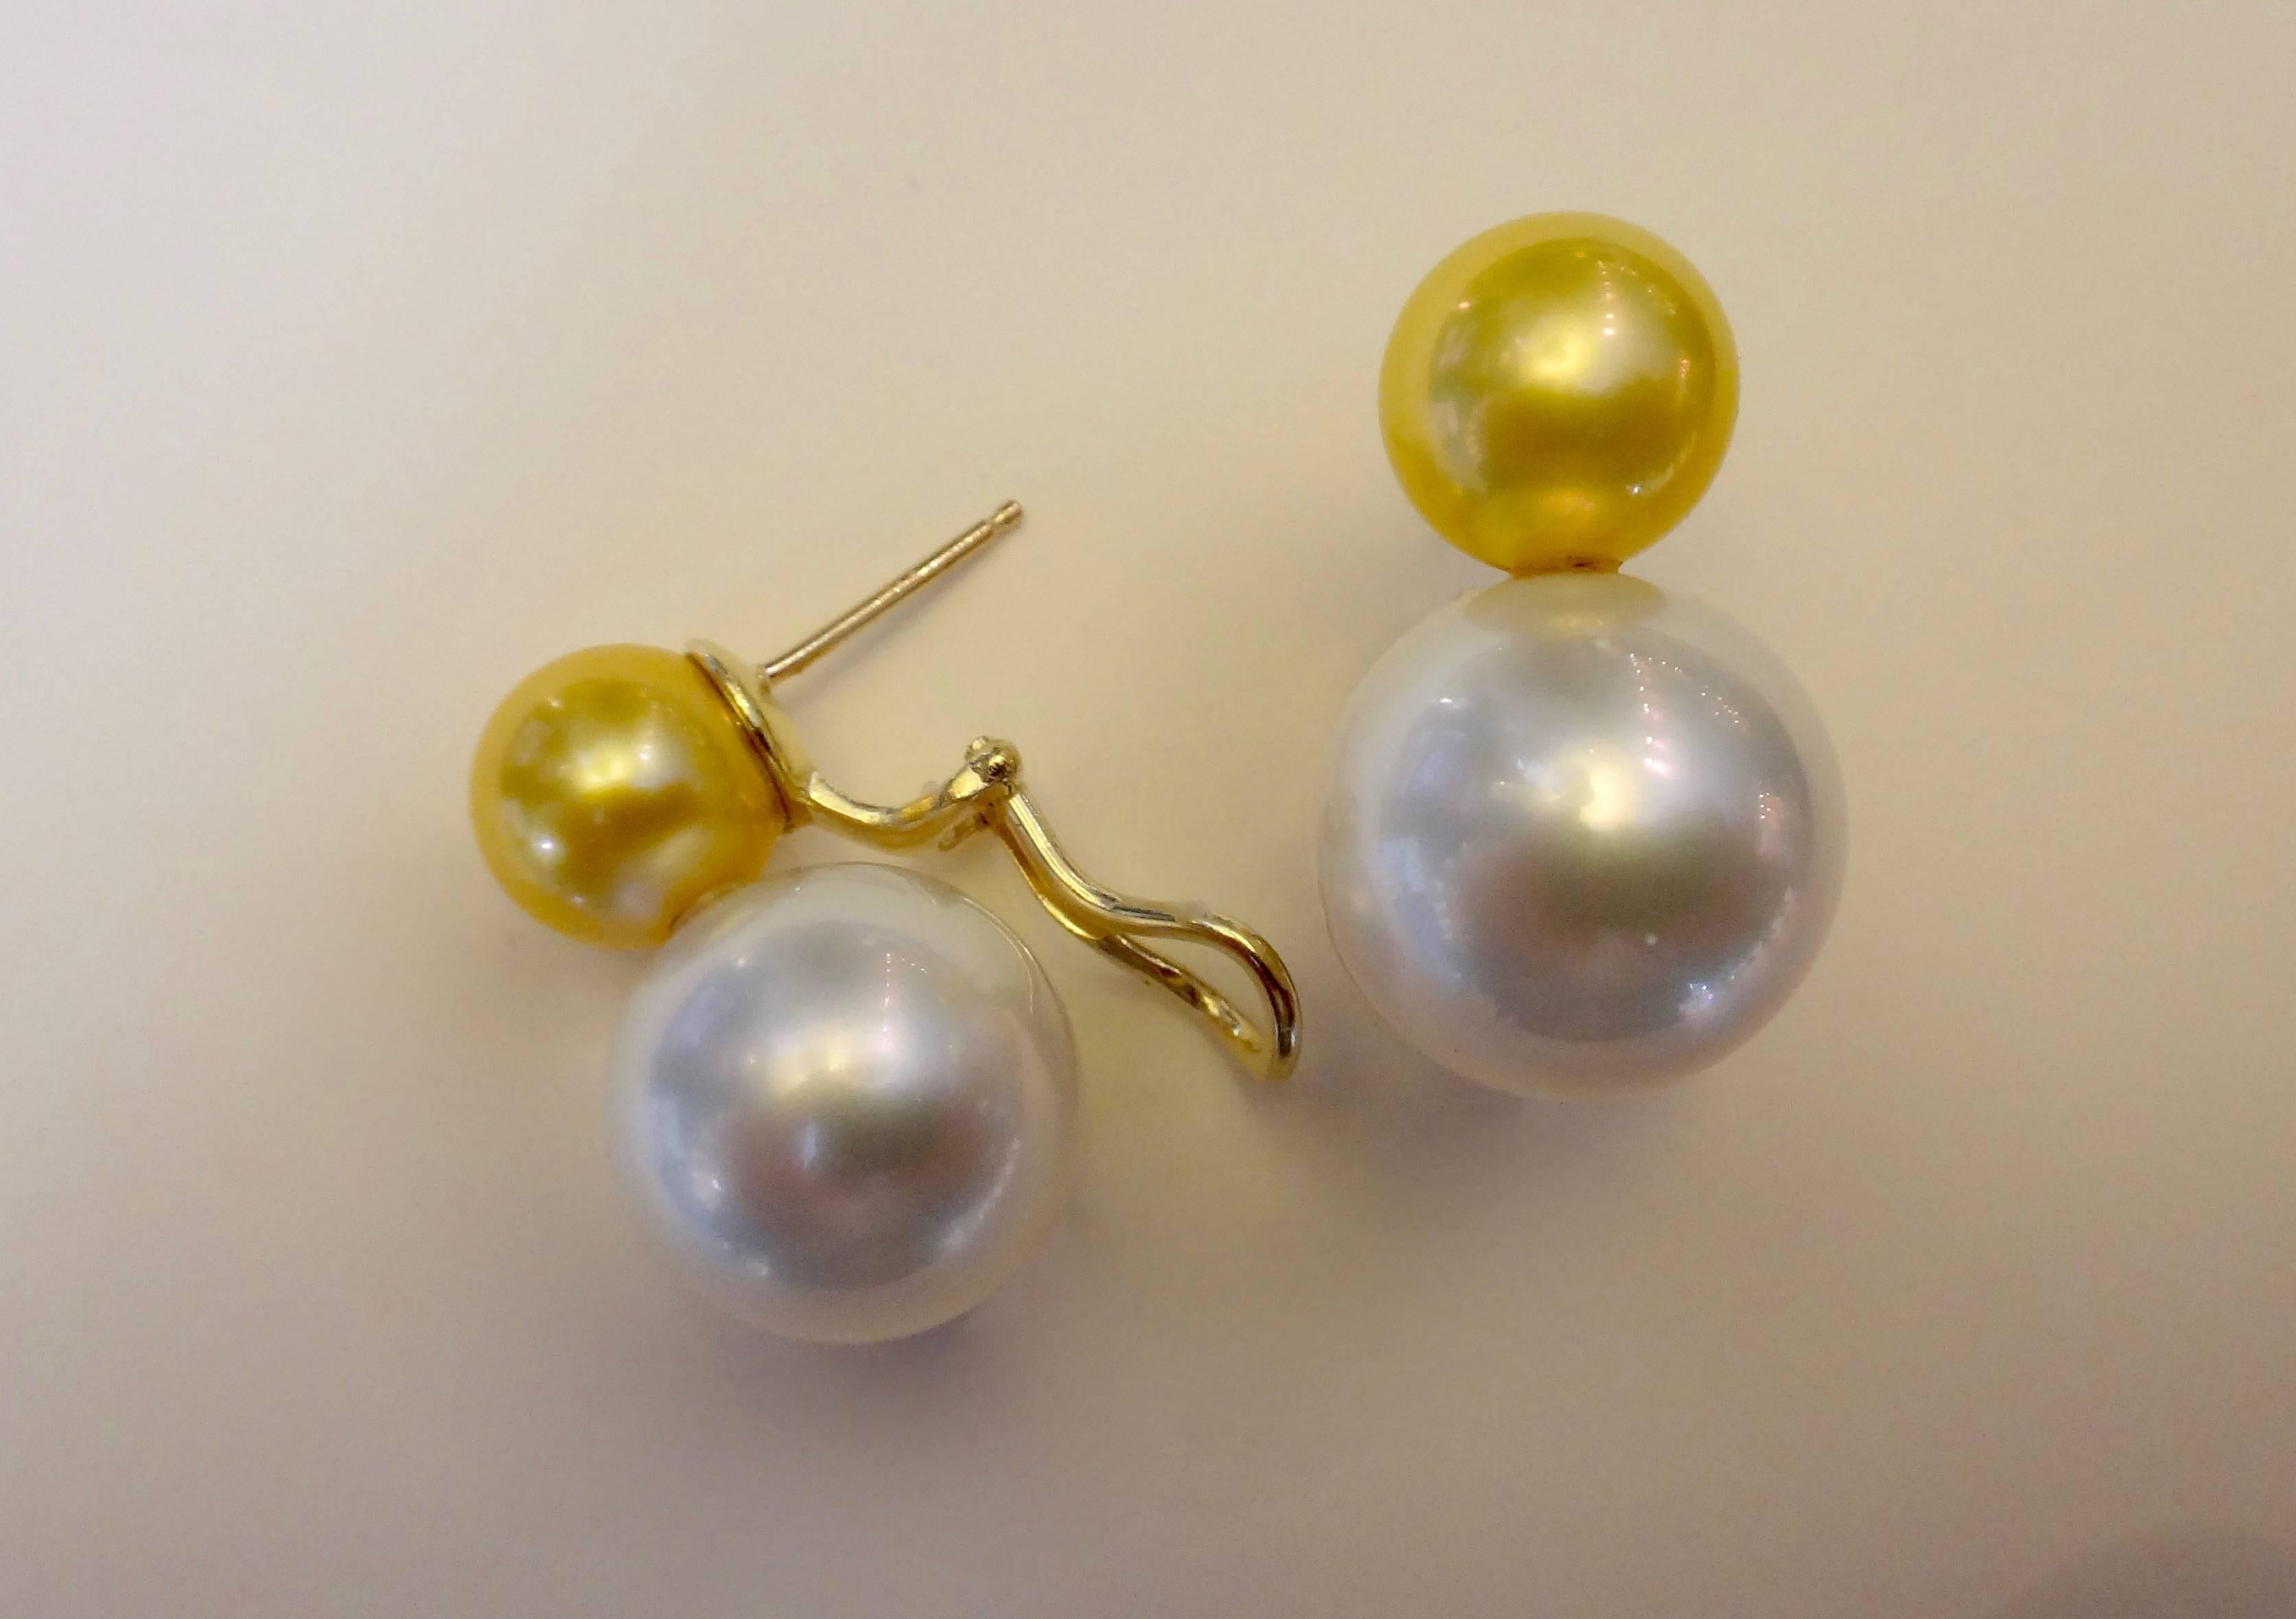 Gem quality golden South Seas pearls are paired with massive (15.5mm) gem quality white South Seas pearls in these "Due Perla" earrings.  Set in 18k yellow gold, the earrings have posts with omega clip backs for added security.  